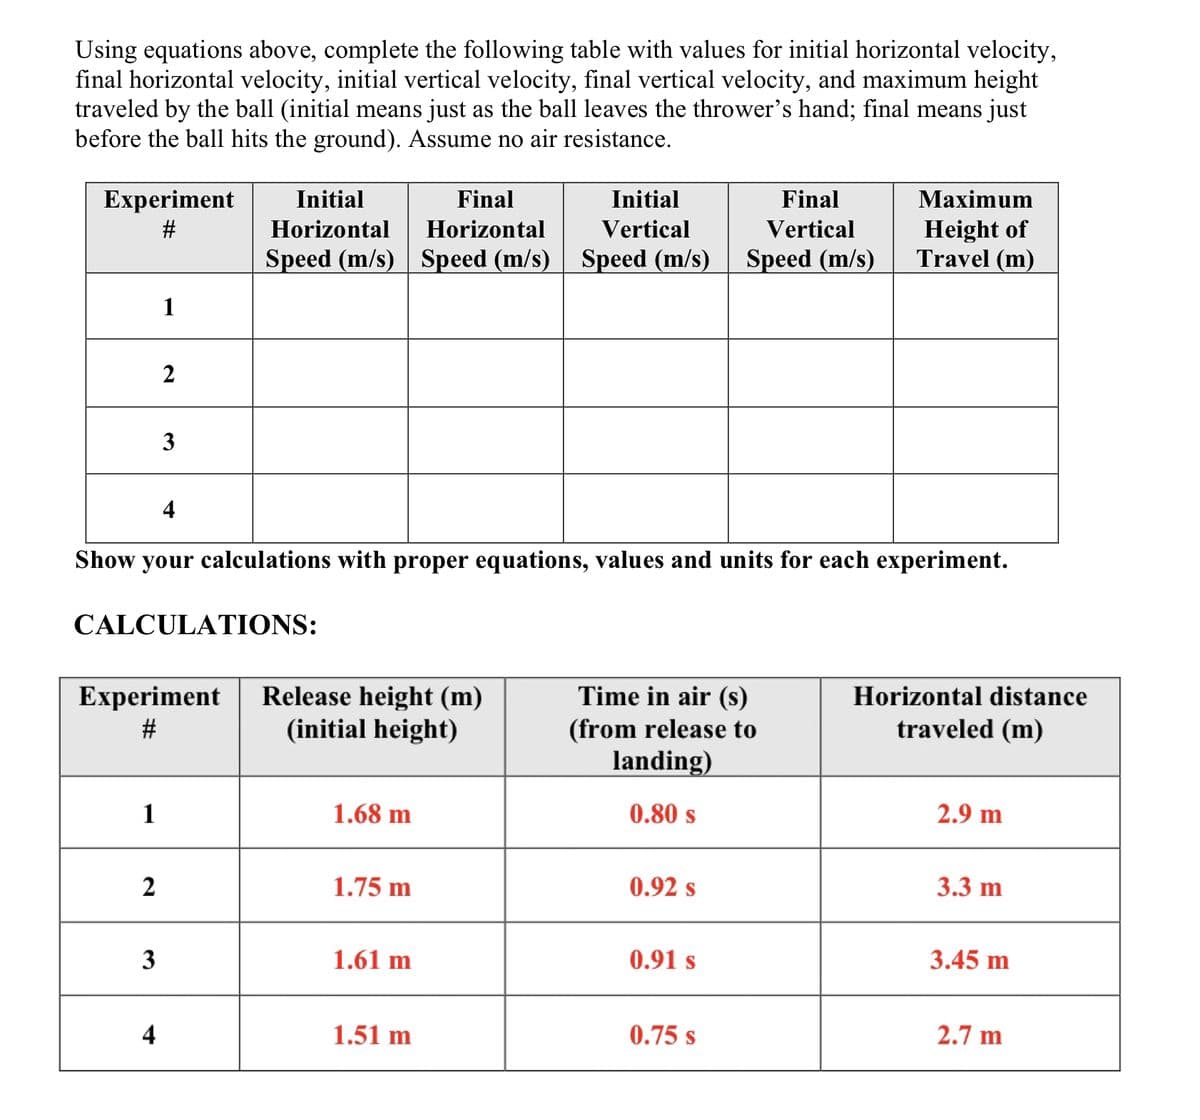 Using equations above, complete the following table with values for initial horizontal velocity,
final horizontal velocity, initial vertical velocity, final vertical velocity, and maximum height
traveled by the ball (initial means just as the ball leaves the thrower's hand; final means just
before the ball hits the ground). Assume no air resistance.
Initial
Final
Initial
Experiment
#
Final
Vertical
Horizontal
Horizontal
Vertical
Maximum
Height of
Travel (m)
Speed (m/s) Speed (m/s) | Speed (m/s) Speed (m/s)
1
2
3
4
Show your calculations with proper equations, values and units for each experiment.
CALCULATIONS:
Time in air (s)
Experiment Release height (m)
(initial height)
Horizontal distance
traveled (m)
#
(from release to
landing)
1
1.68 m
0.80 s
2.9 m
2
1.75 m
0.92 s
3.3 m
3
1.61 m
0.91 s
3.45 m
4
1.51 m
0.75 S
2.7 m